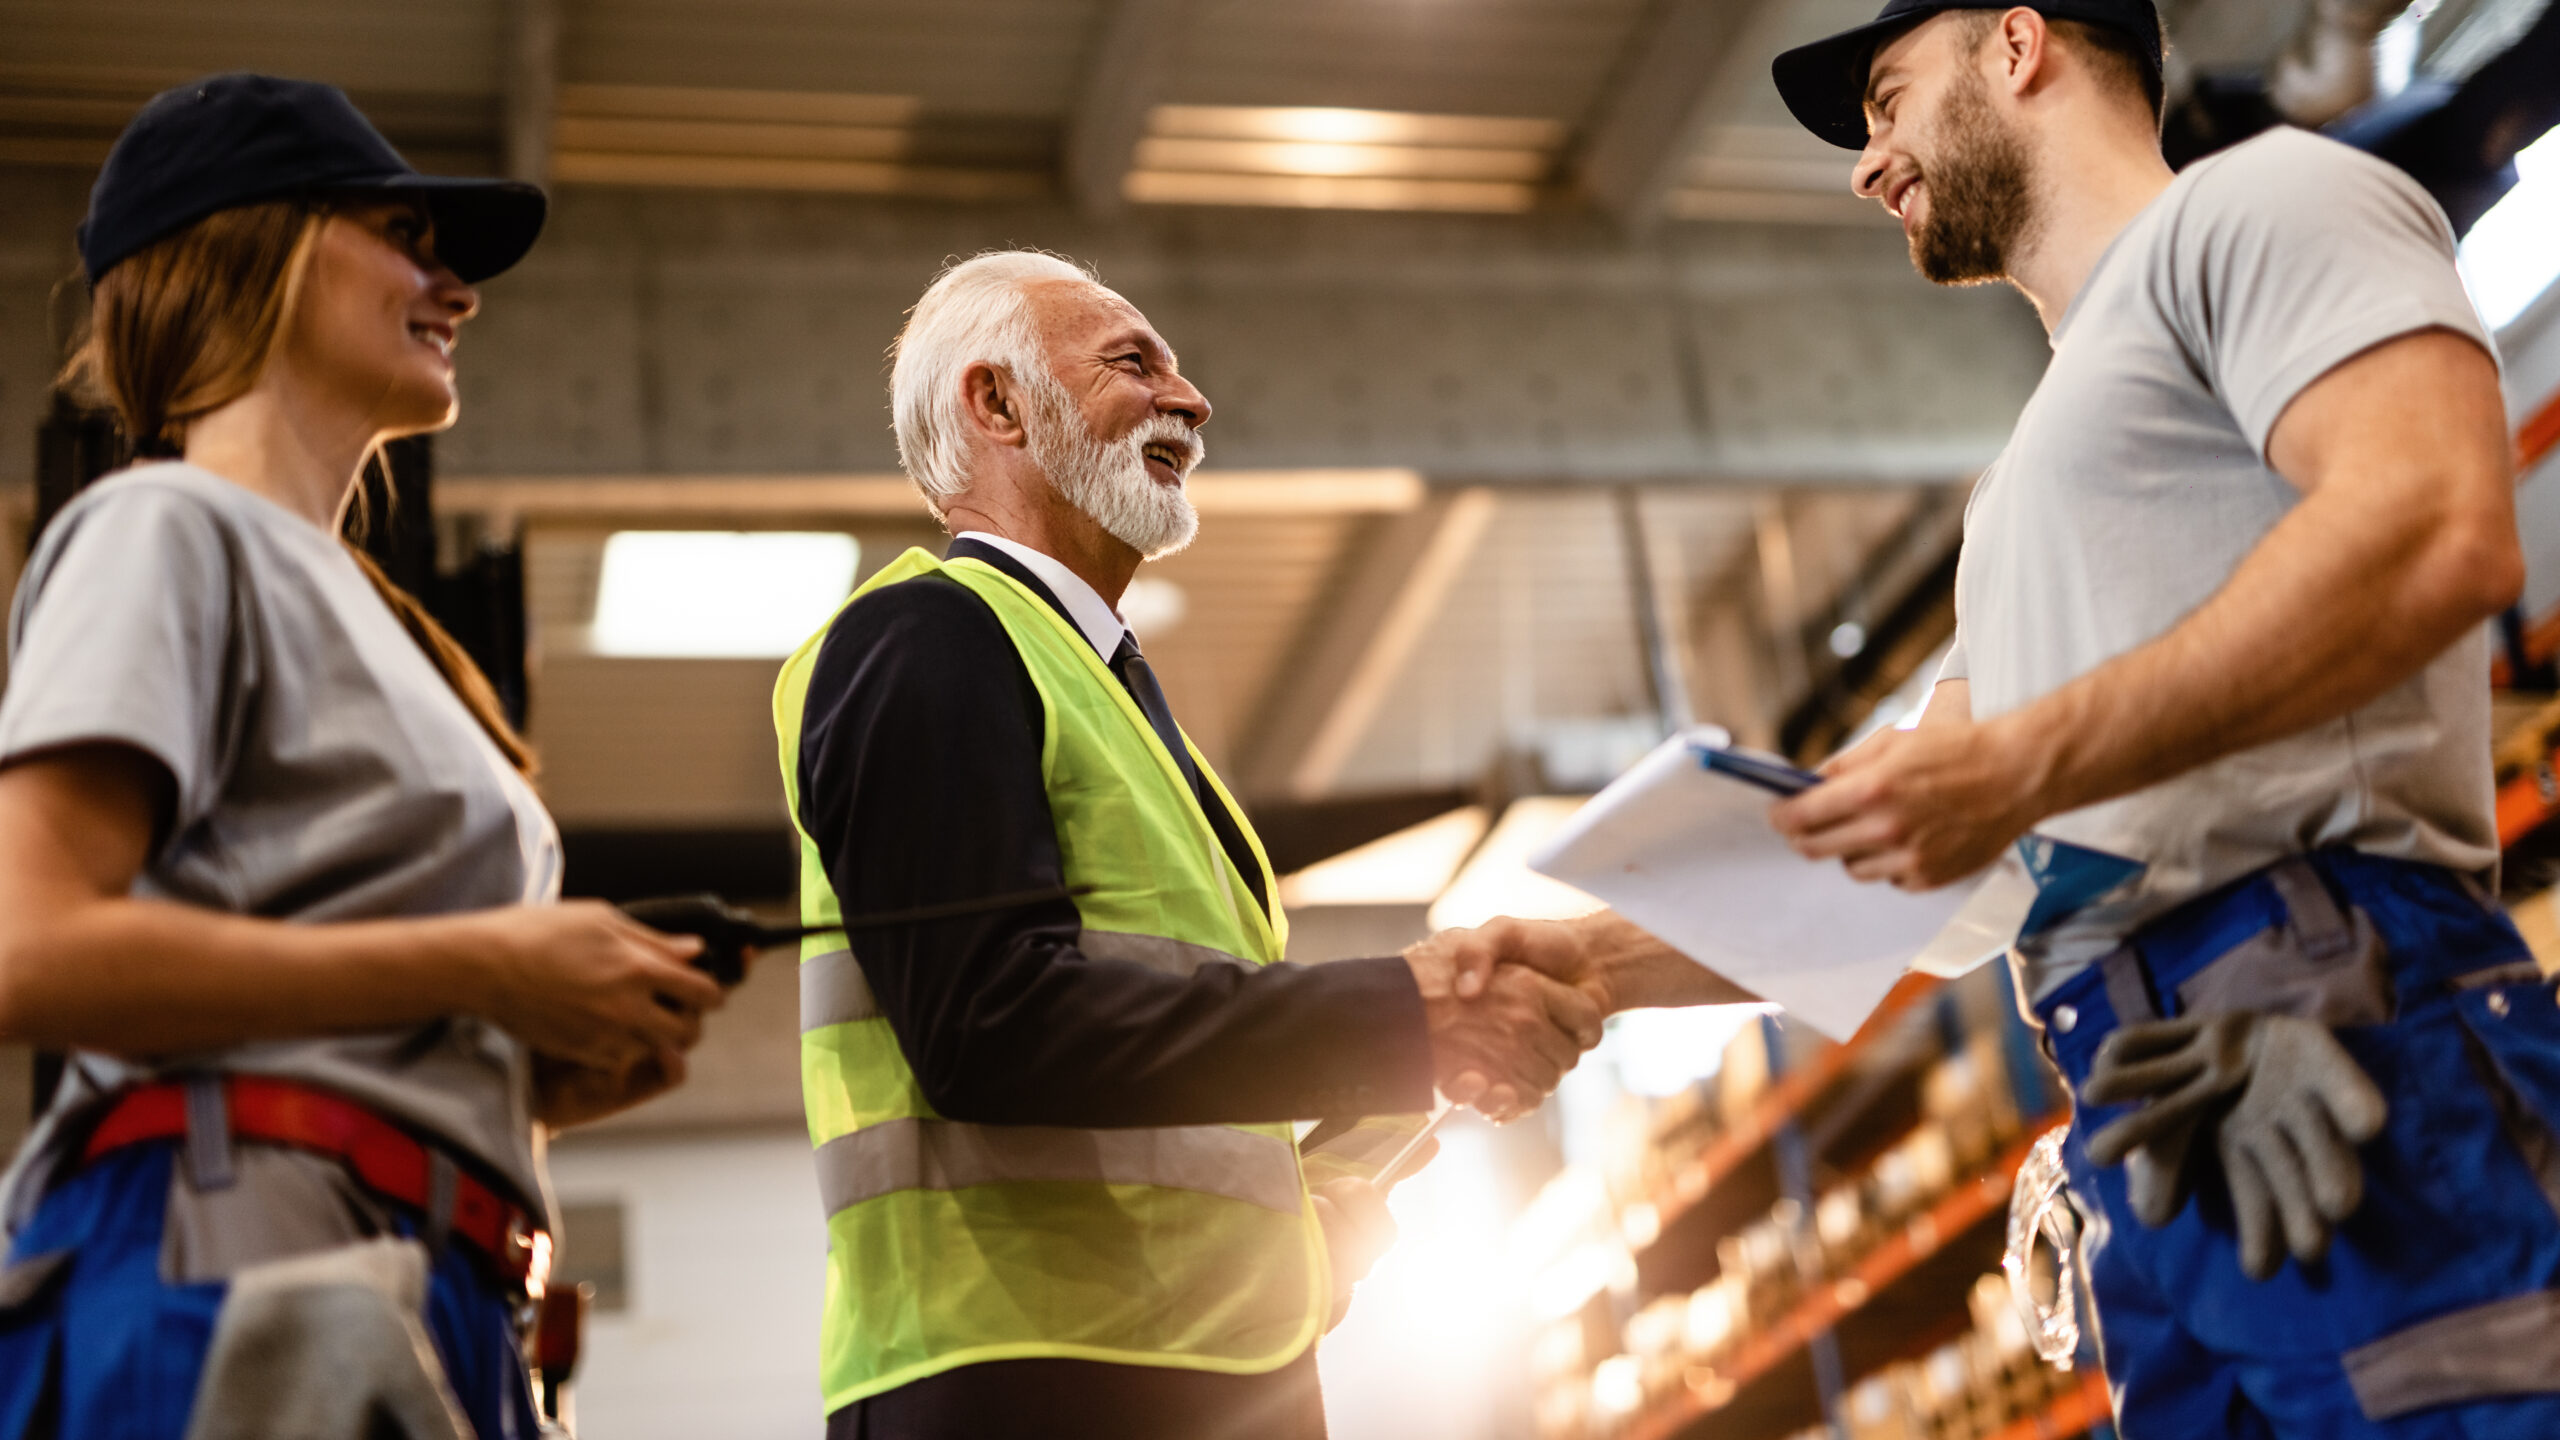 Customer Experience in the Logistics Sector: Expectations and Realities